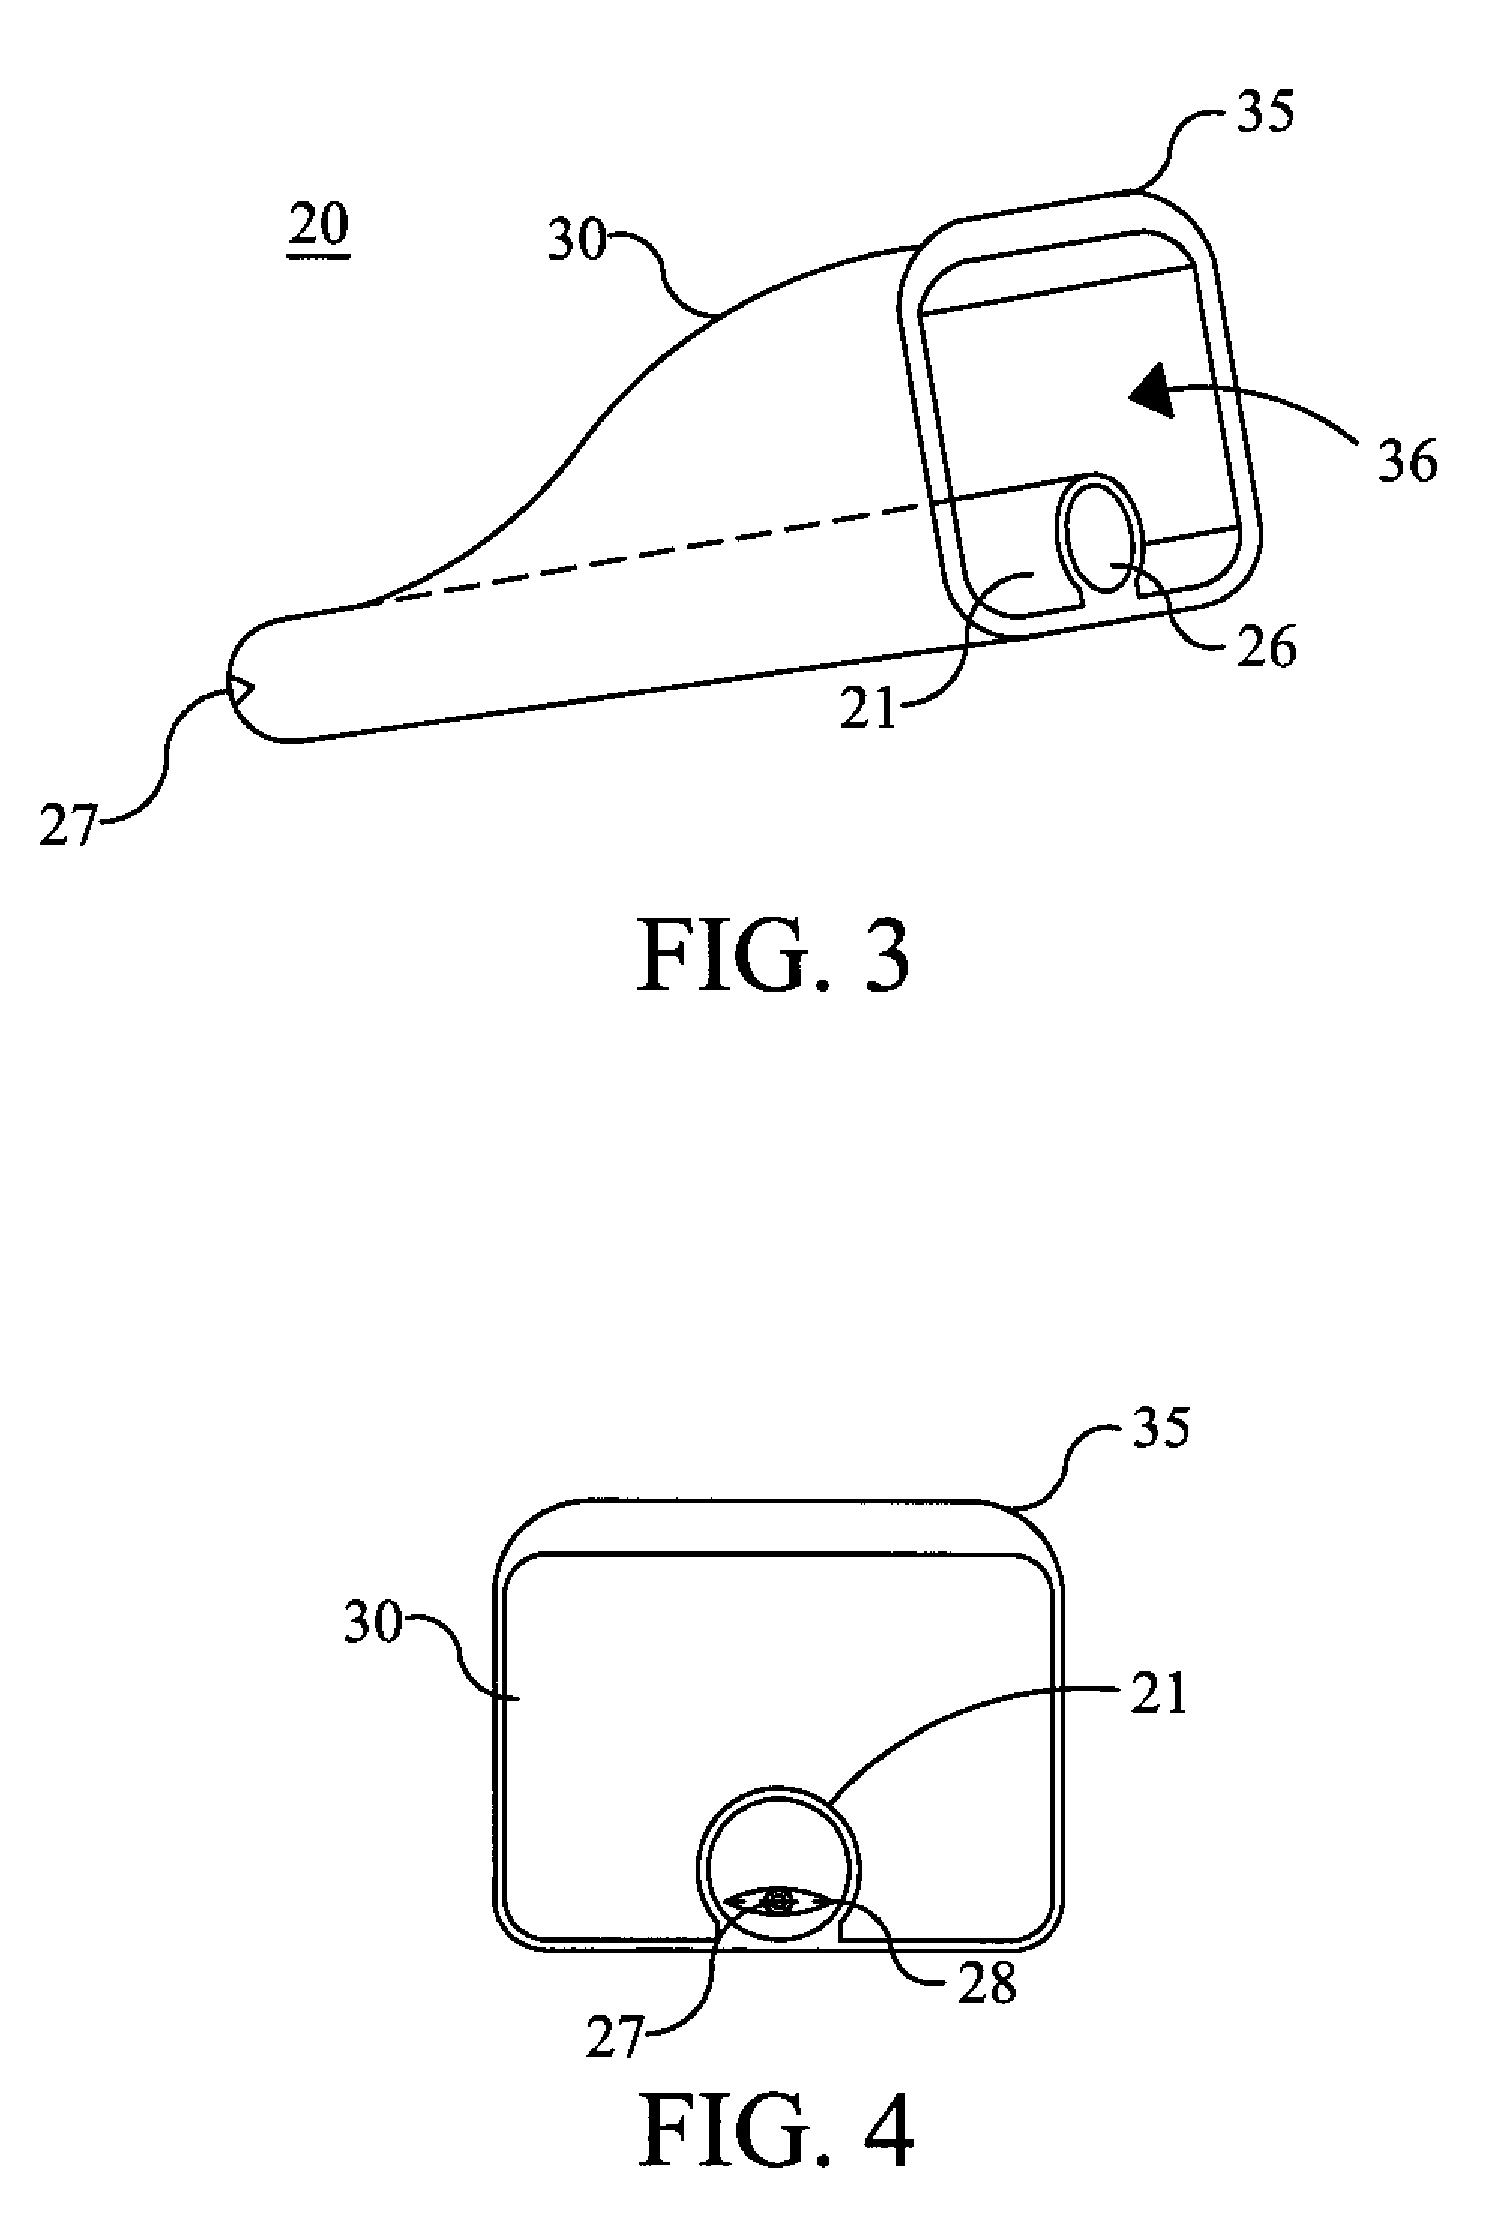 Method for intranasal administration of a pharmaceutical composition